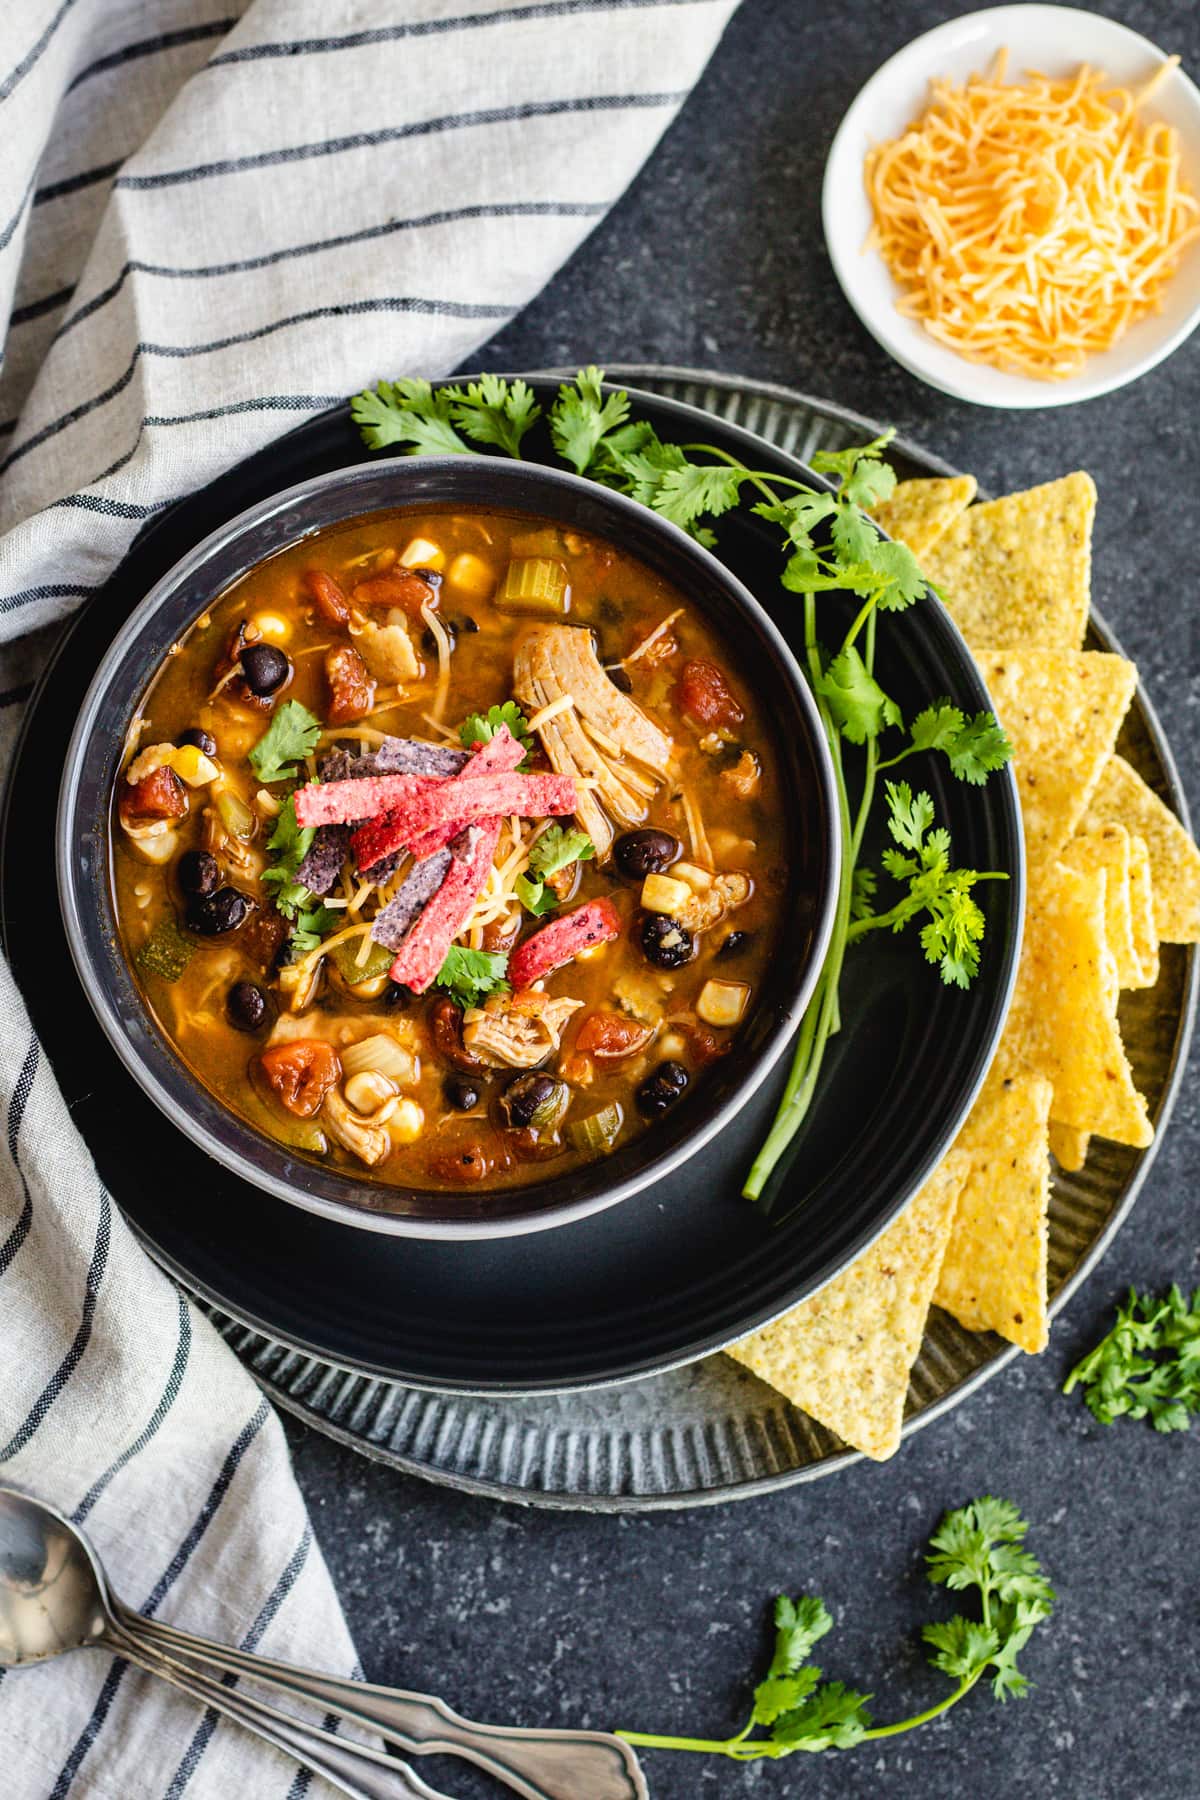 chicken tortilla soup in black bowl with cilantro sprigs and tortilla chips